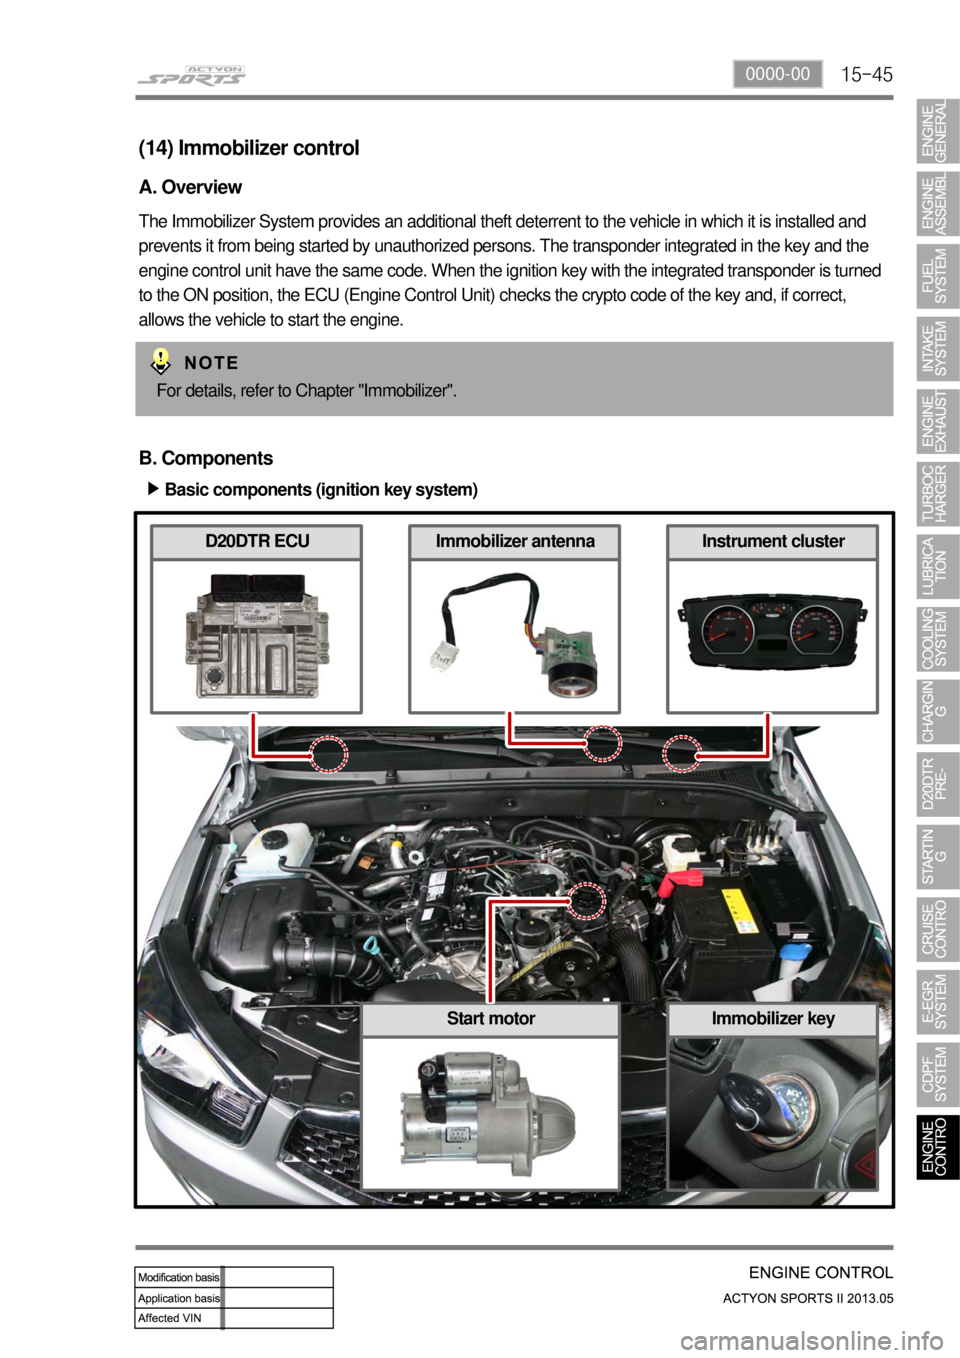 SSANGYONG NEW ACTYON SPORTS 2013  Service Manual 15-450000-00
(14) Immobilizer control
A. Overview
The Immobilizer System provides an additional theft deterrent to the vehicle in which it is installed and 
prevents it from being started by unauthori